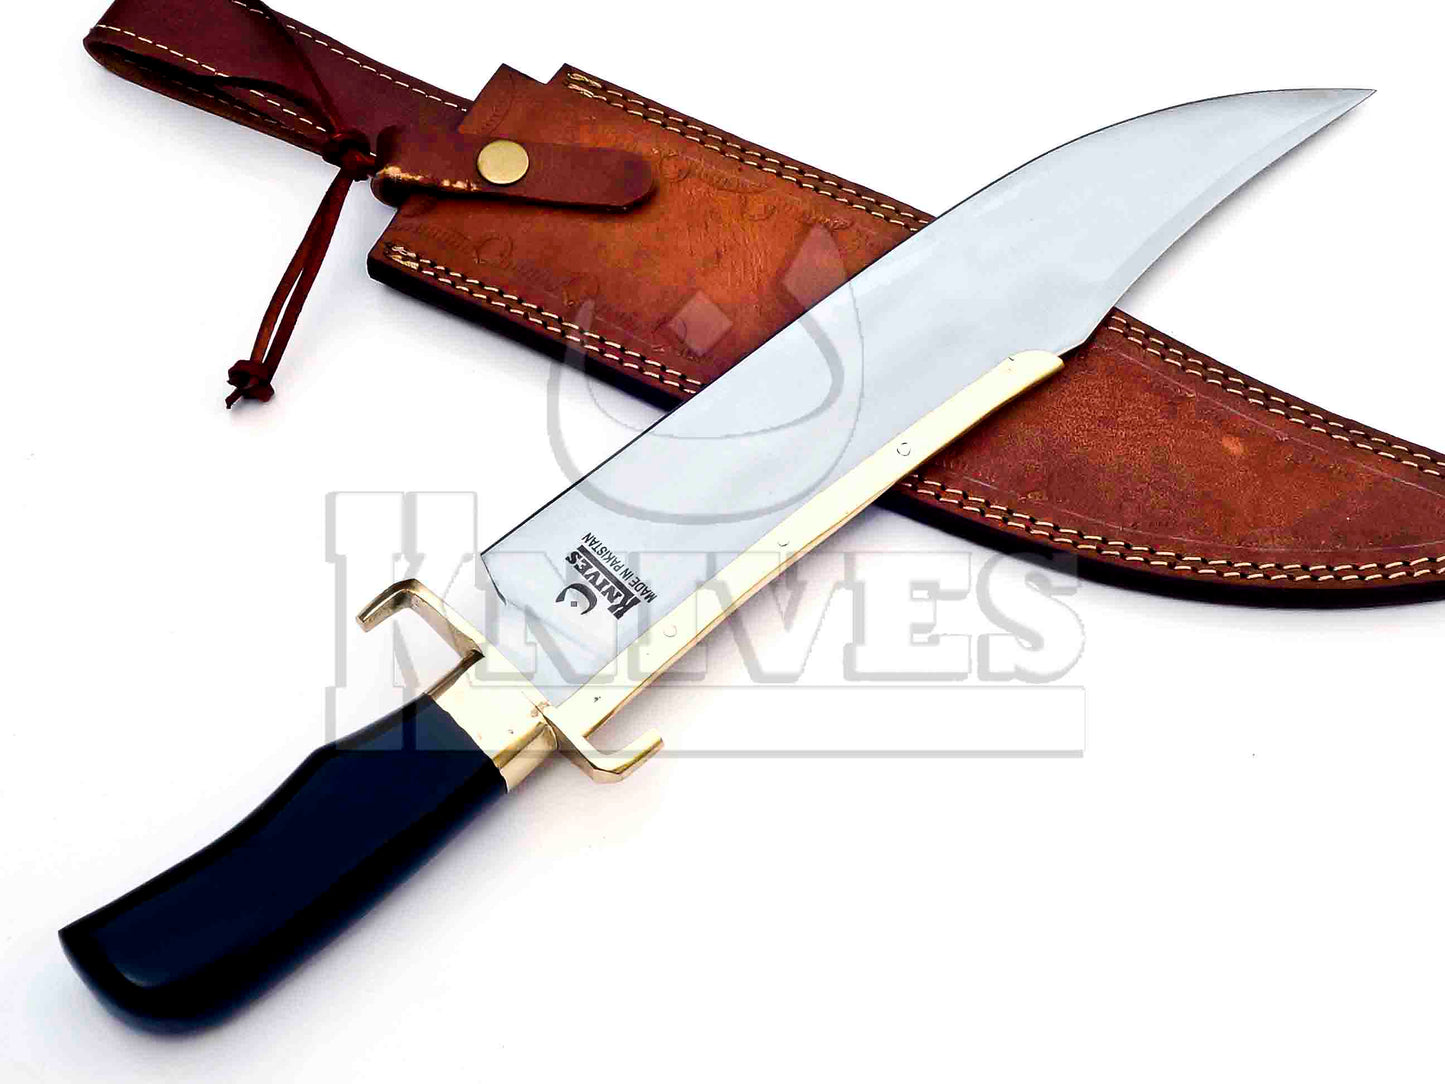 J2 Steel Bowie Knife with Bull Horn Handle